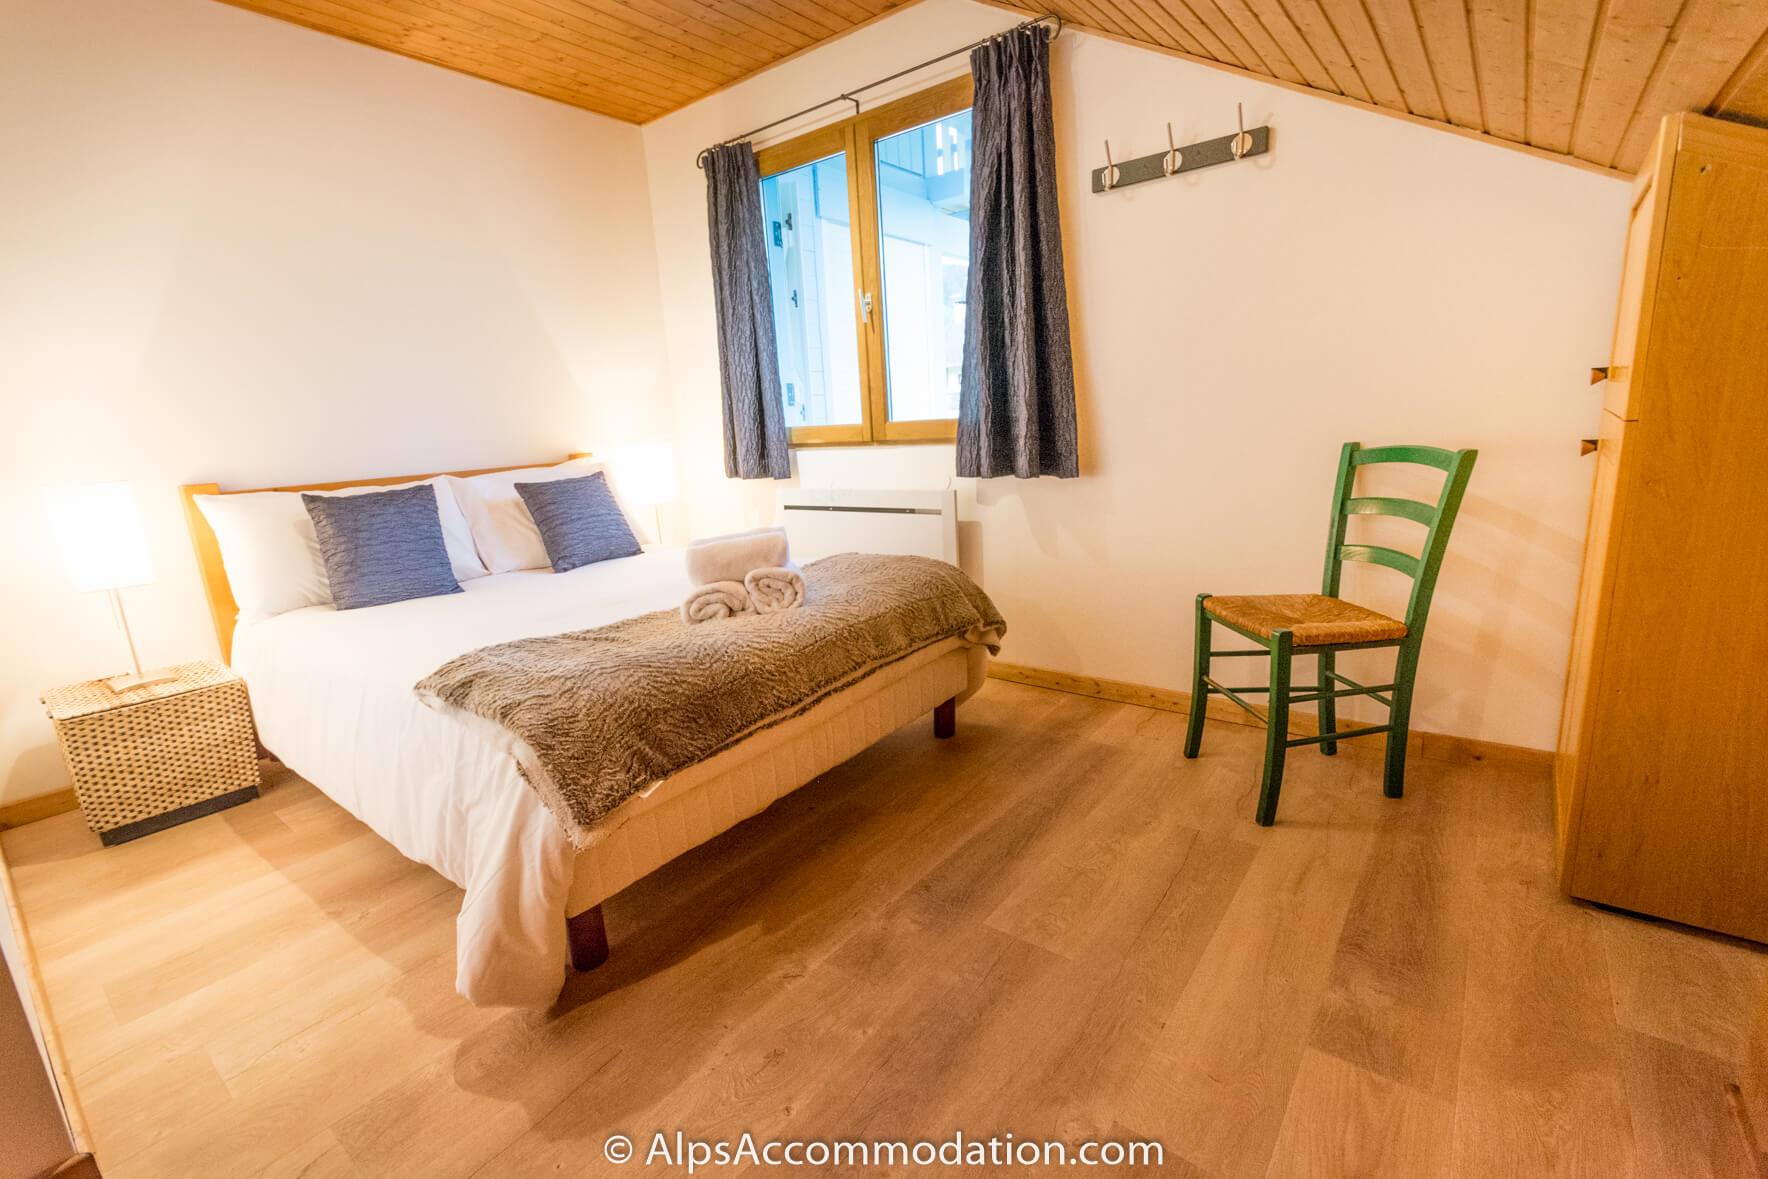 Chalet Bleu Morillon - The spacious double bedroom on the lower level